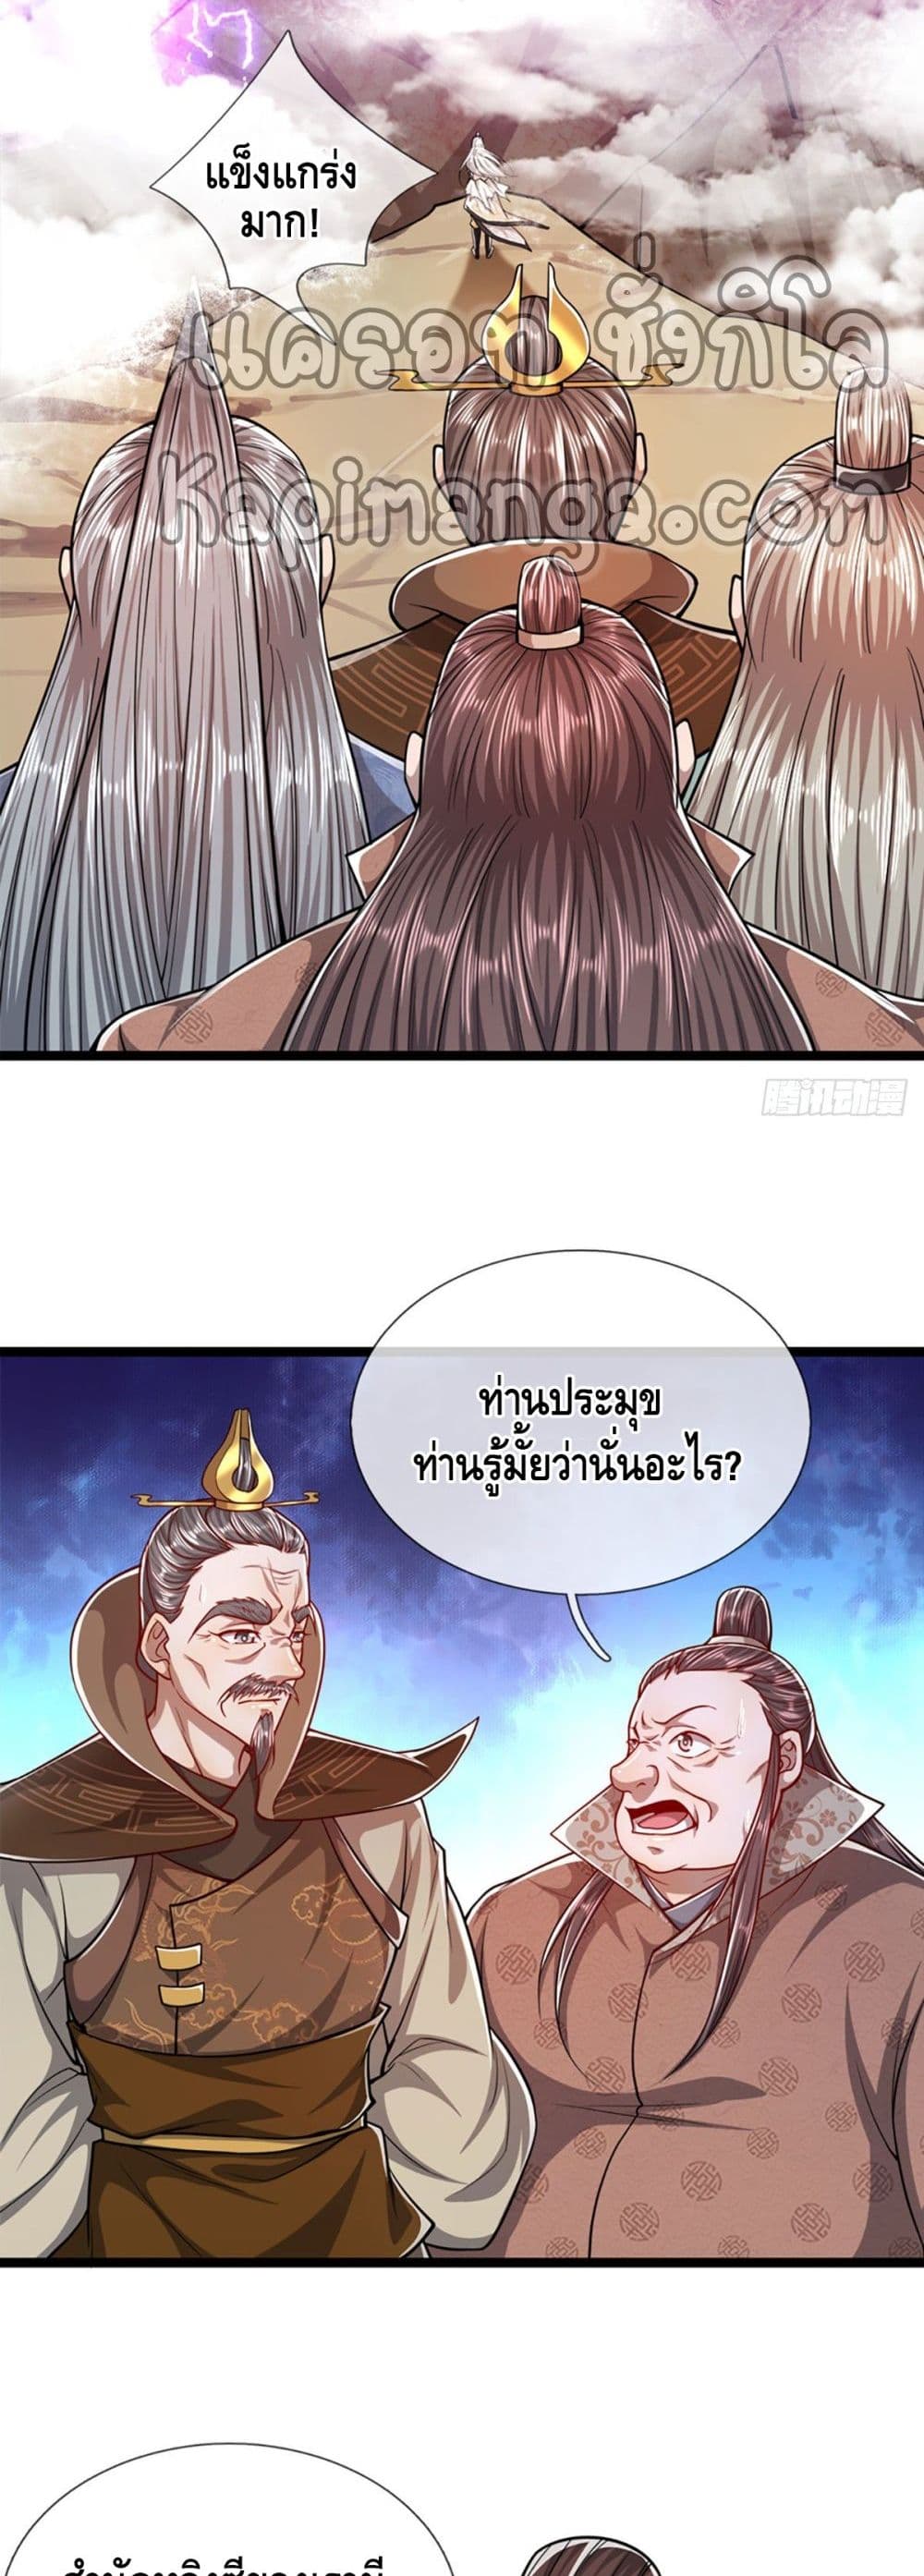 Disciples All Over the World à¸à¸­à¸à¸à¸µà¹ 69 (11)